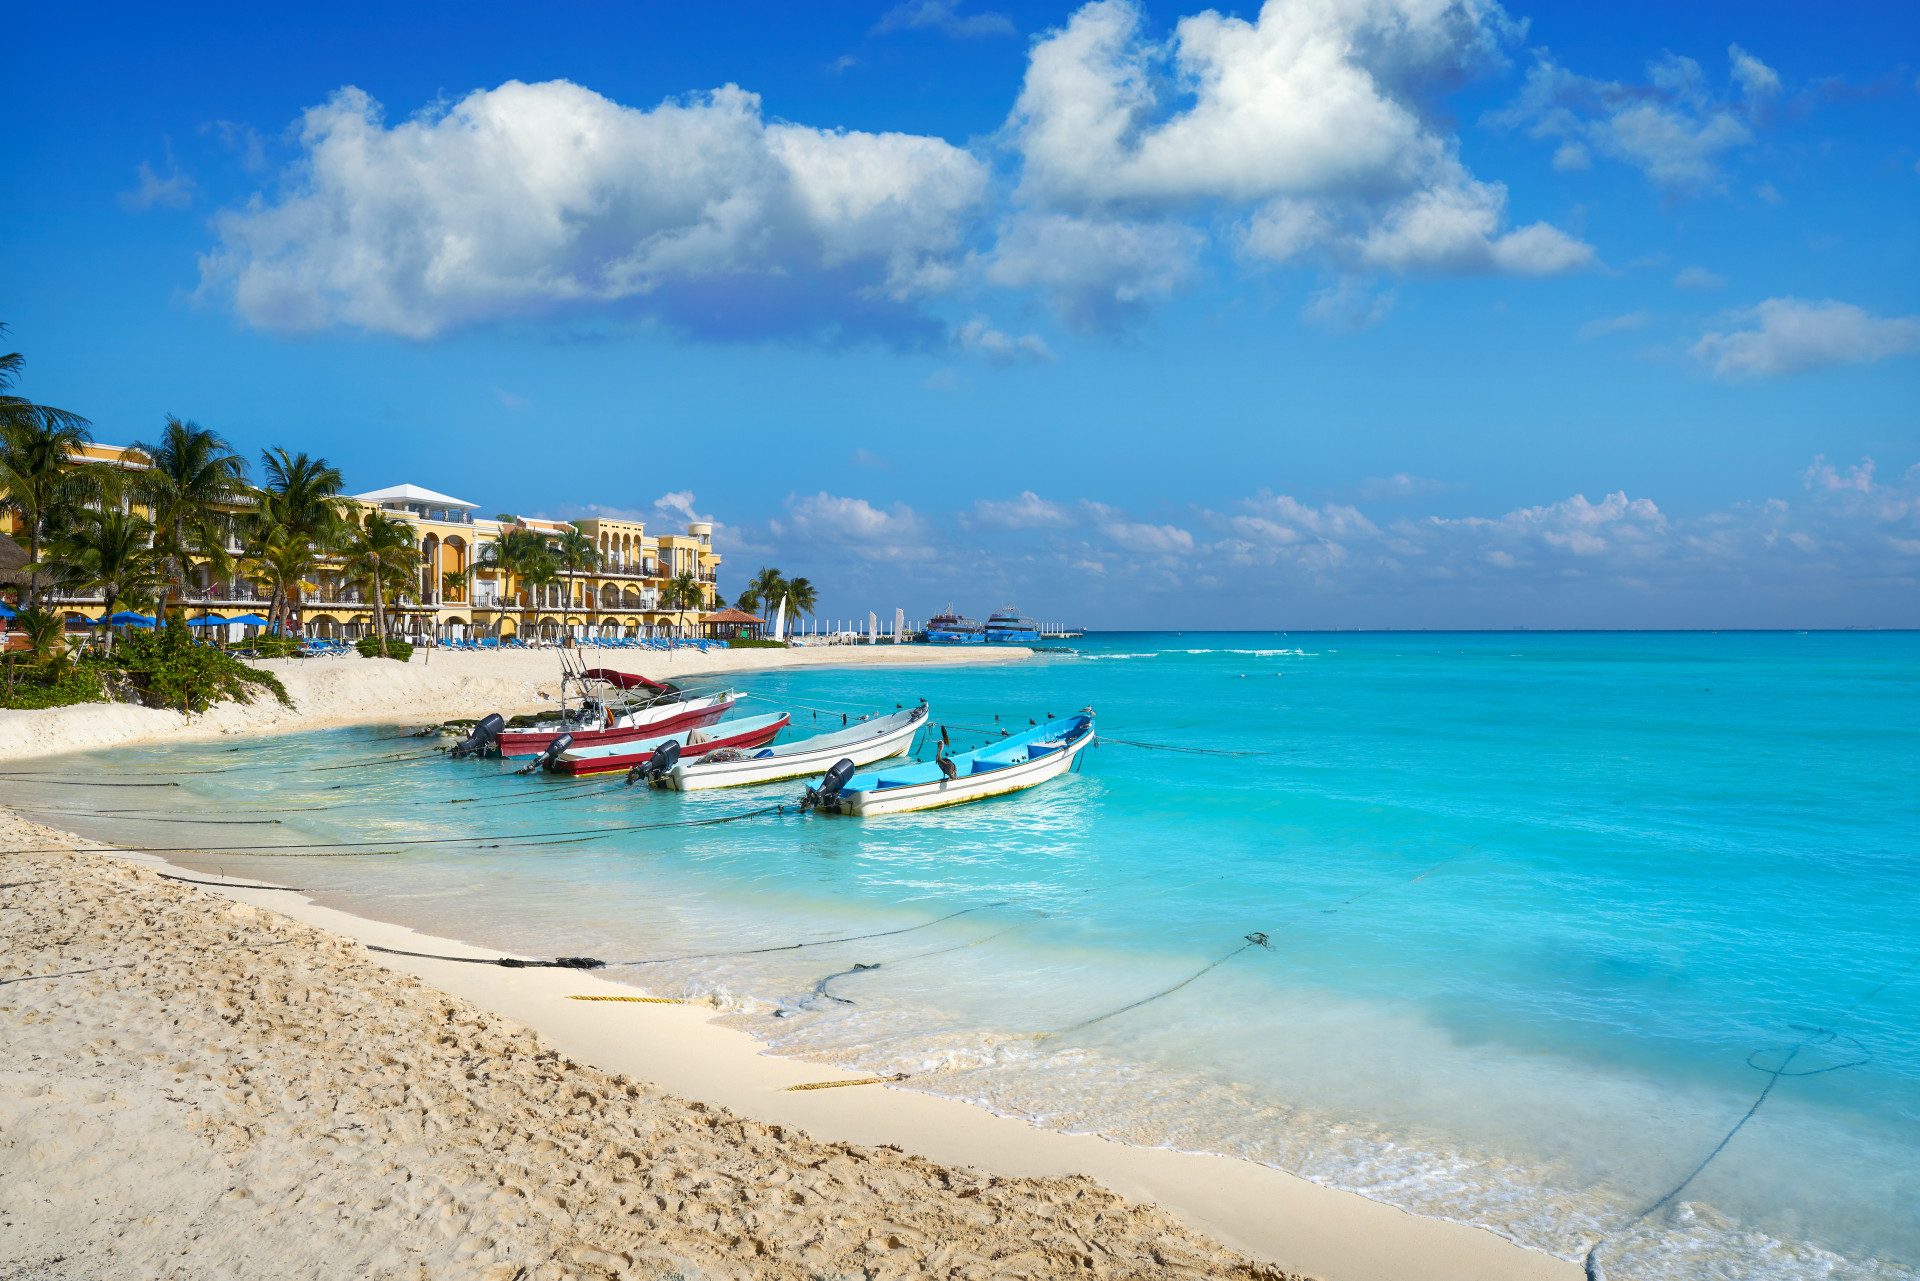 Playa del Carmen is popular with travelers from around the world, but it is also famous for is accessibility.<p><a href="https://www.msn.com/en-us/community/channel/vid-7xx8mnucu55yw63we9va2gwr7uihbxwc68fxqp25x6tg4ftibpra?cvid=94631541bc0f4f89bfd59158d696ad7e">Follow us and access great exclusive content every day</a></p>